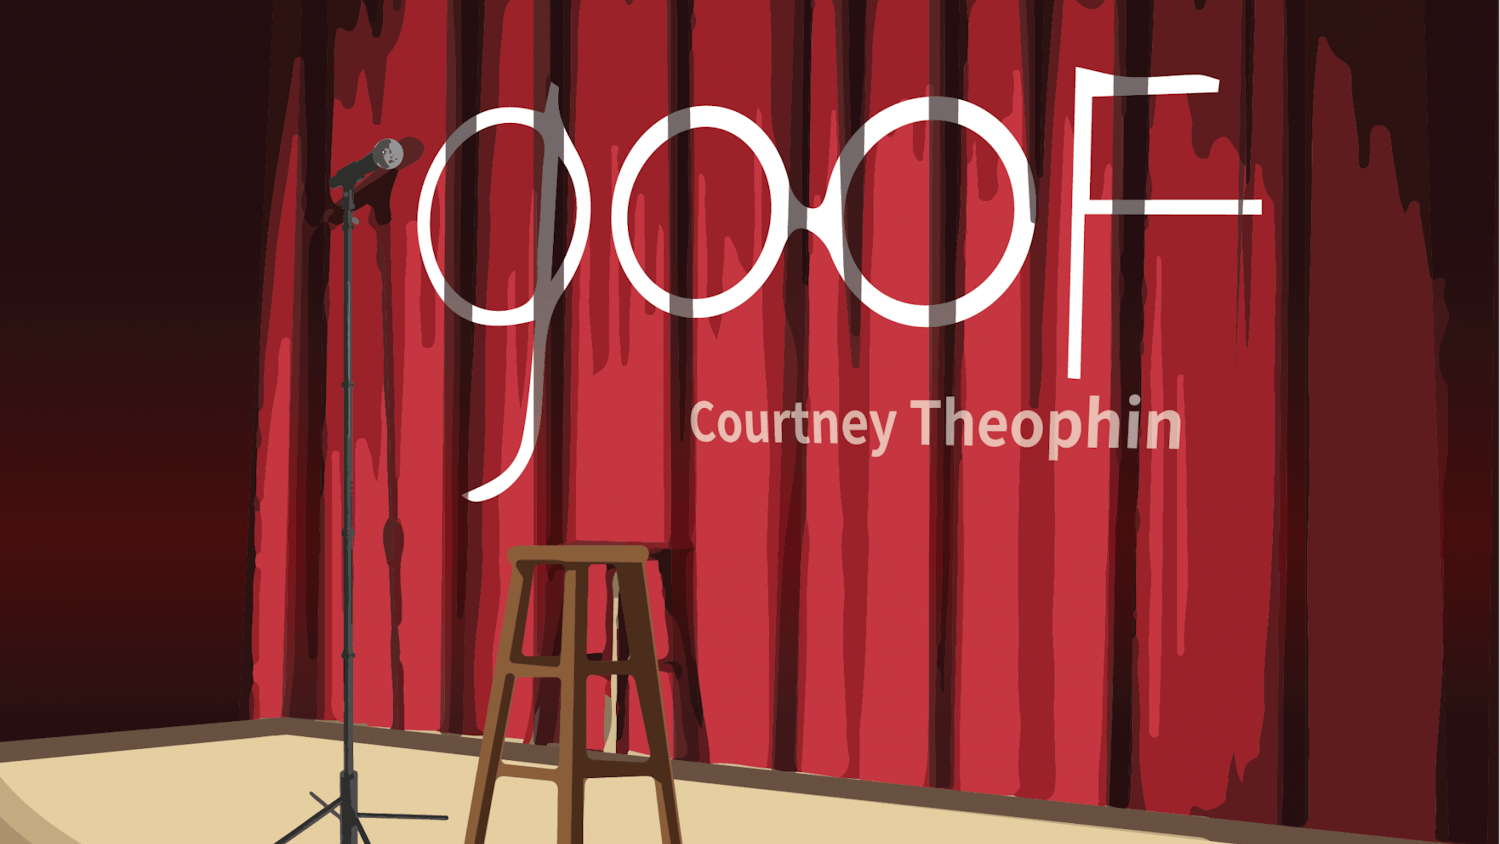 Brothers Courtney and Kenneth Theophin founded Goof Entertainment after a childhood spent creating comedy sketches. 